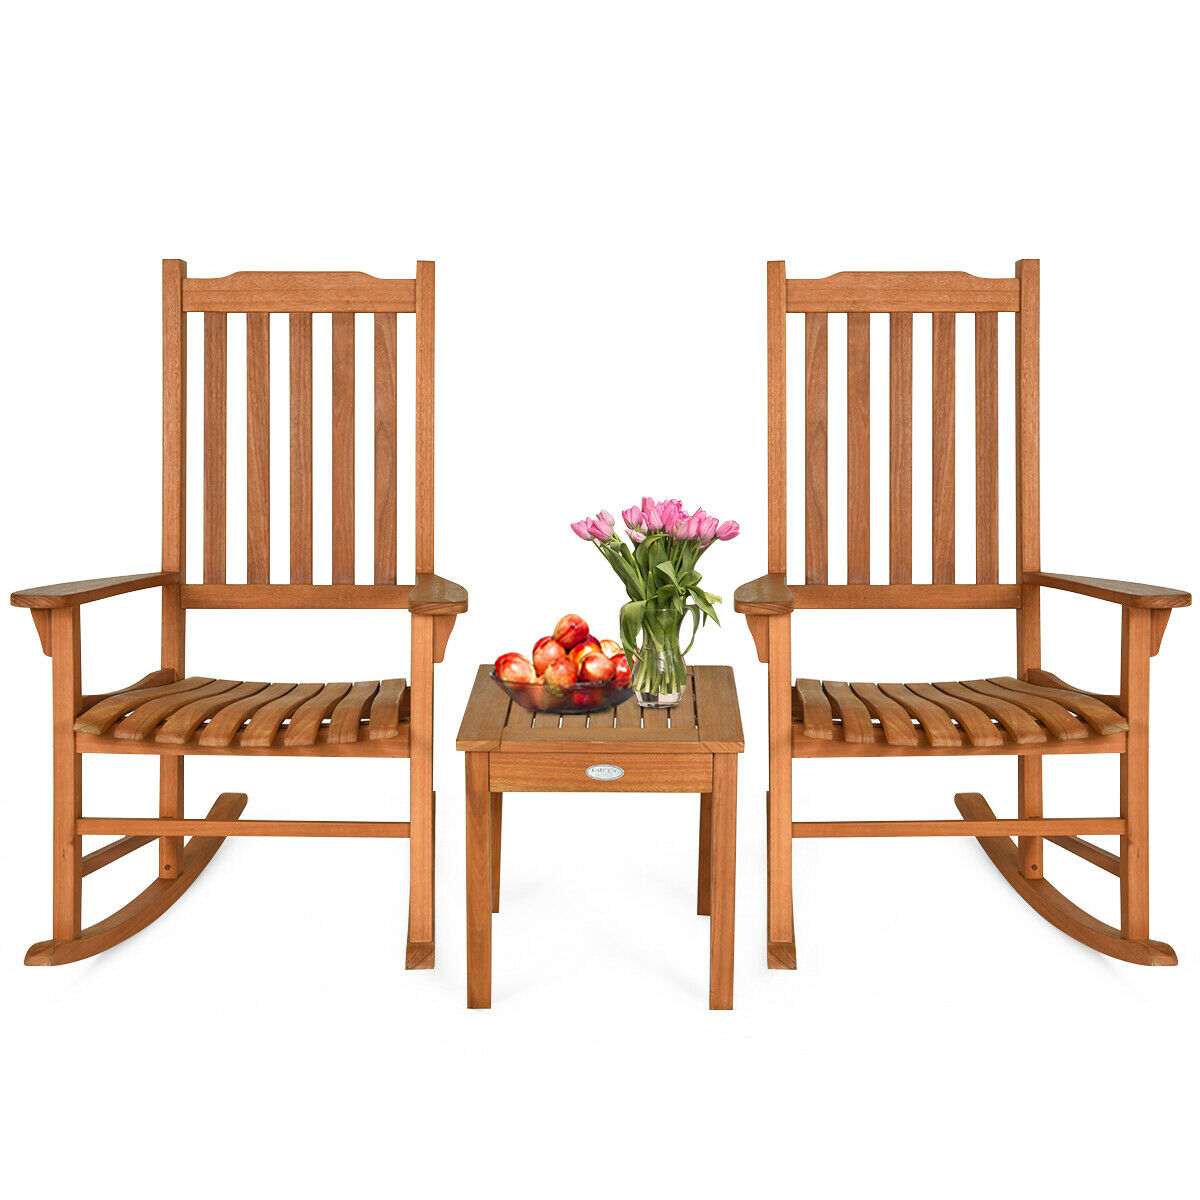 3 Piece Eucalyptus Rocking Chair Set with Coffee Table